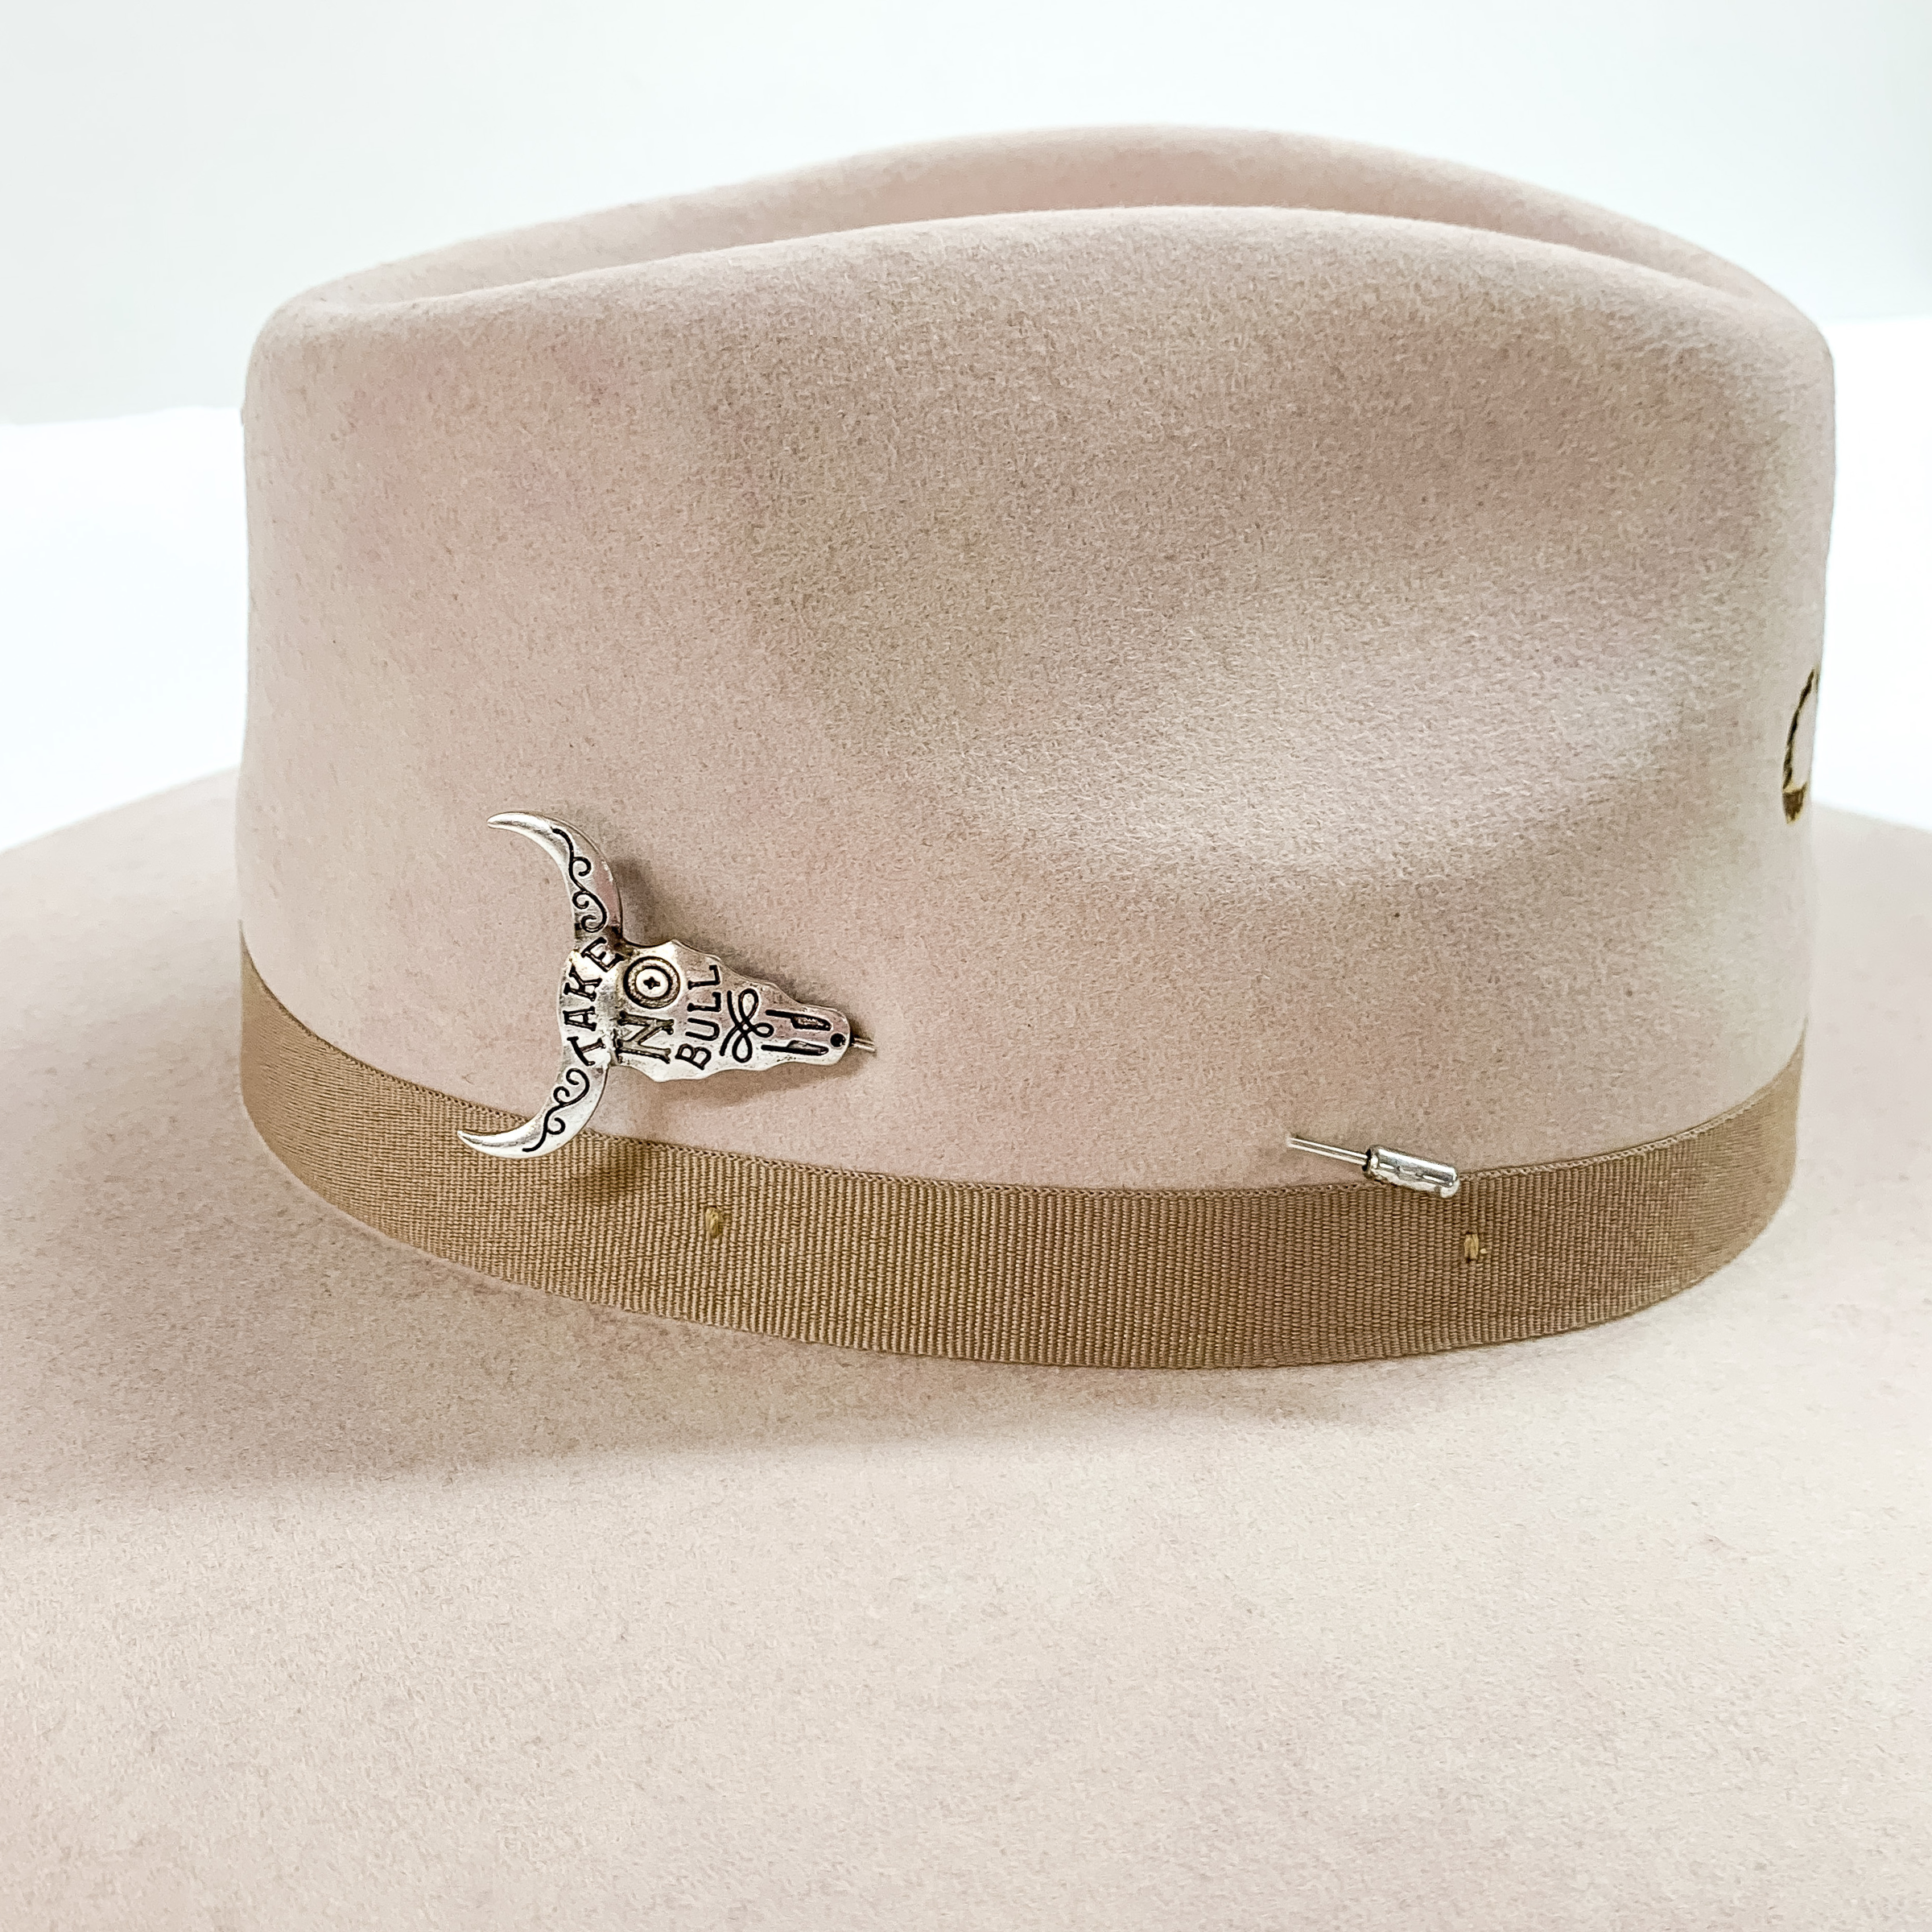 Take No Bull Hat Pin in Silver Tone - Giddy Up Glamour Boutique